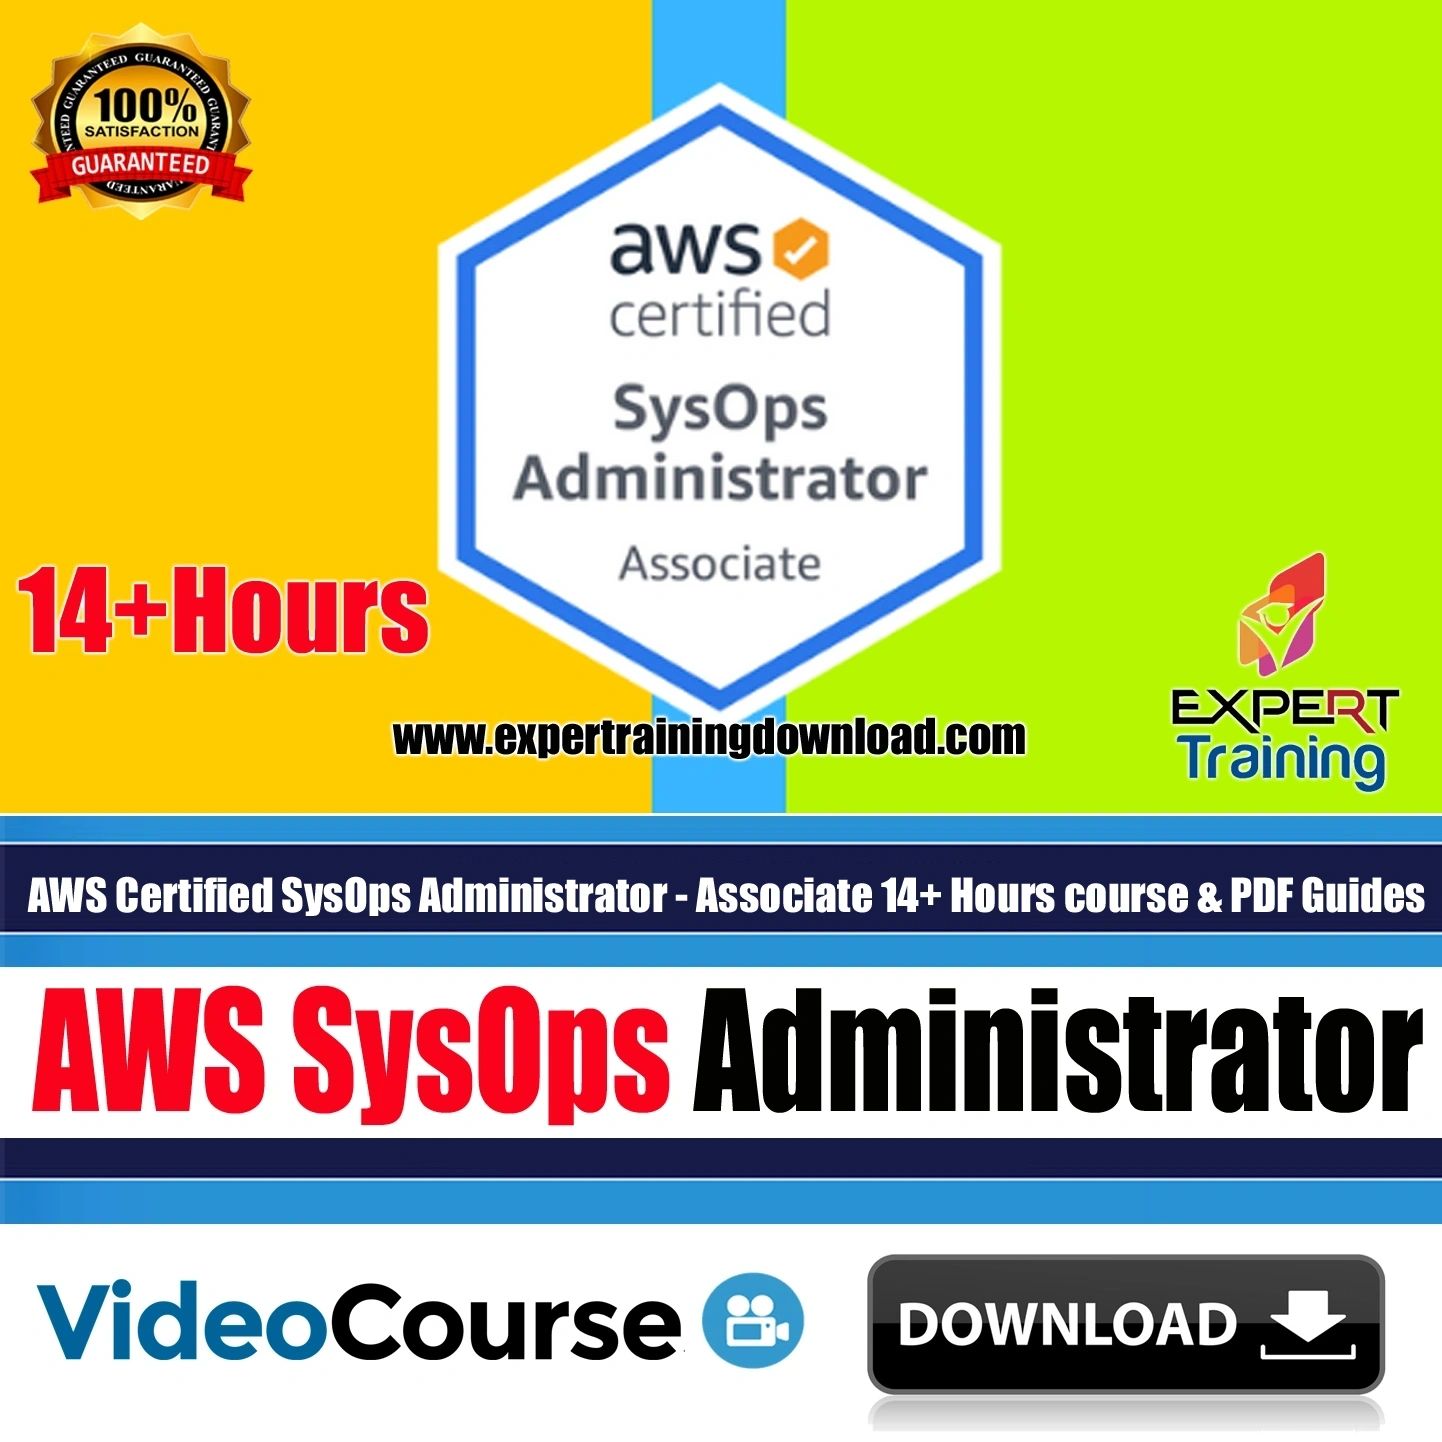 AWS Certified SysOps Administrator – Associate 14+ Hours course & PDF Guides